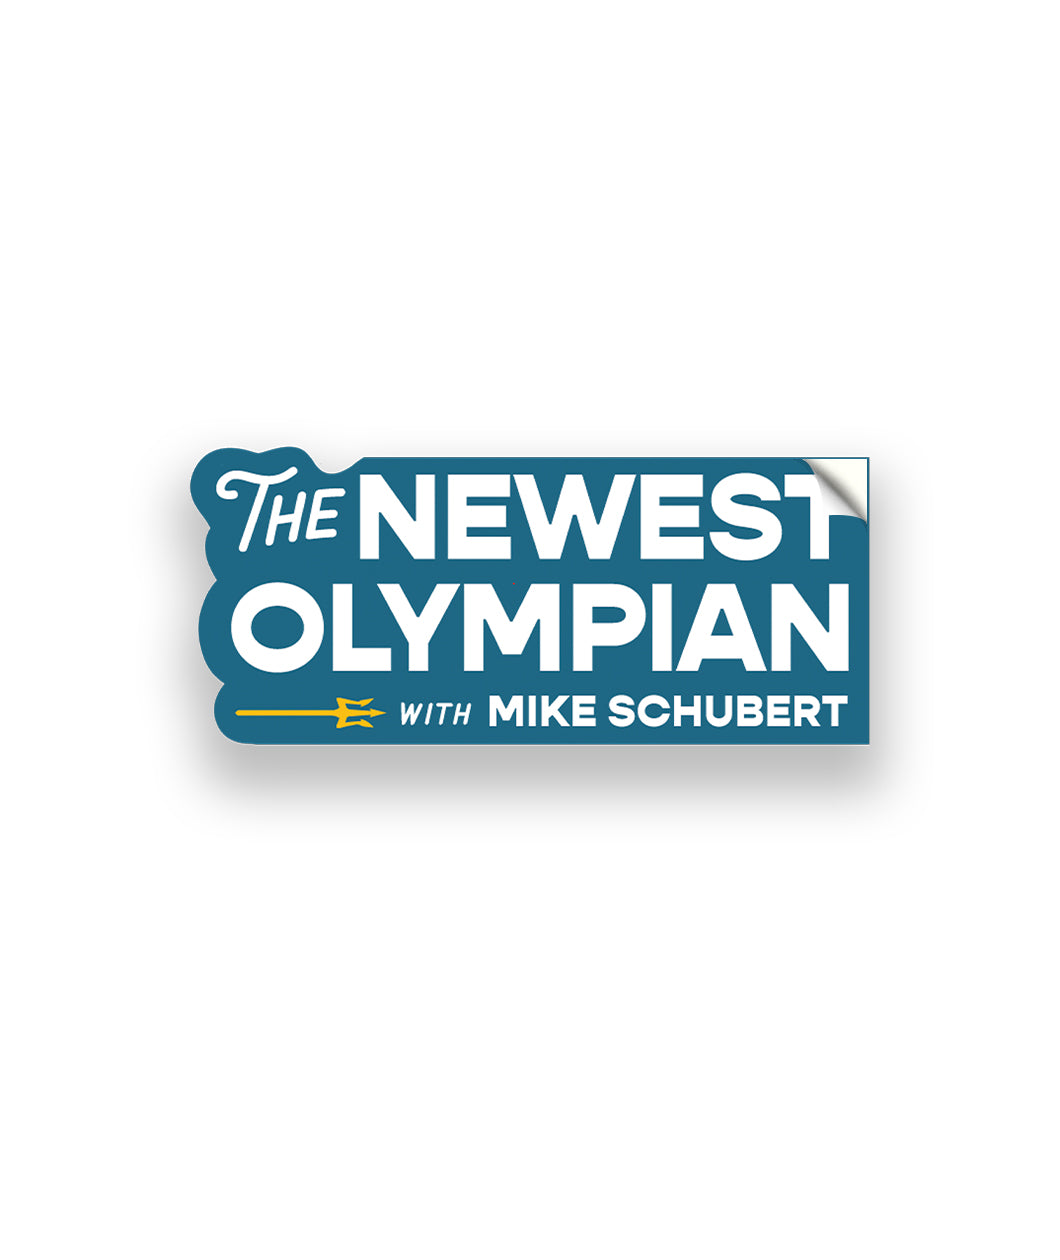 Blue base sticker, the right side is squared off, the left is bubbled around the text. “The Newest Olympian” is written in white sans serif font. “With Mike Schubert” is in white sans serif font below. A yellow trident is to the left of text - from The Newest Olympian